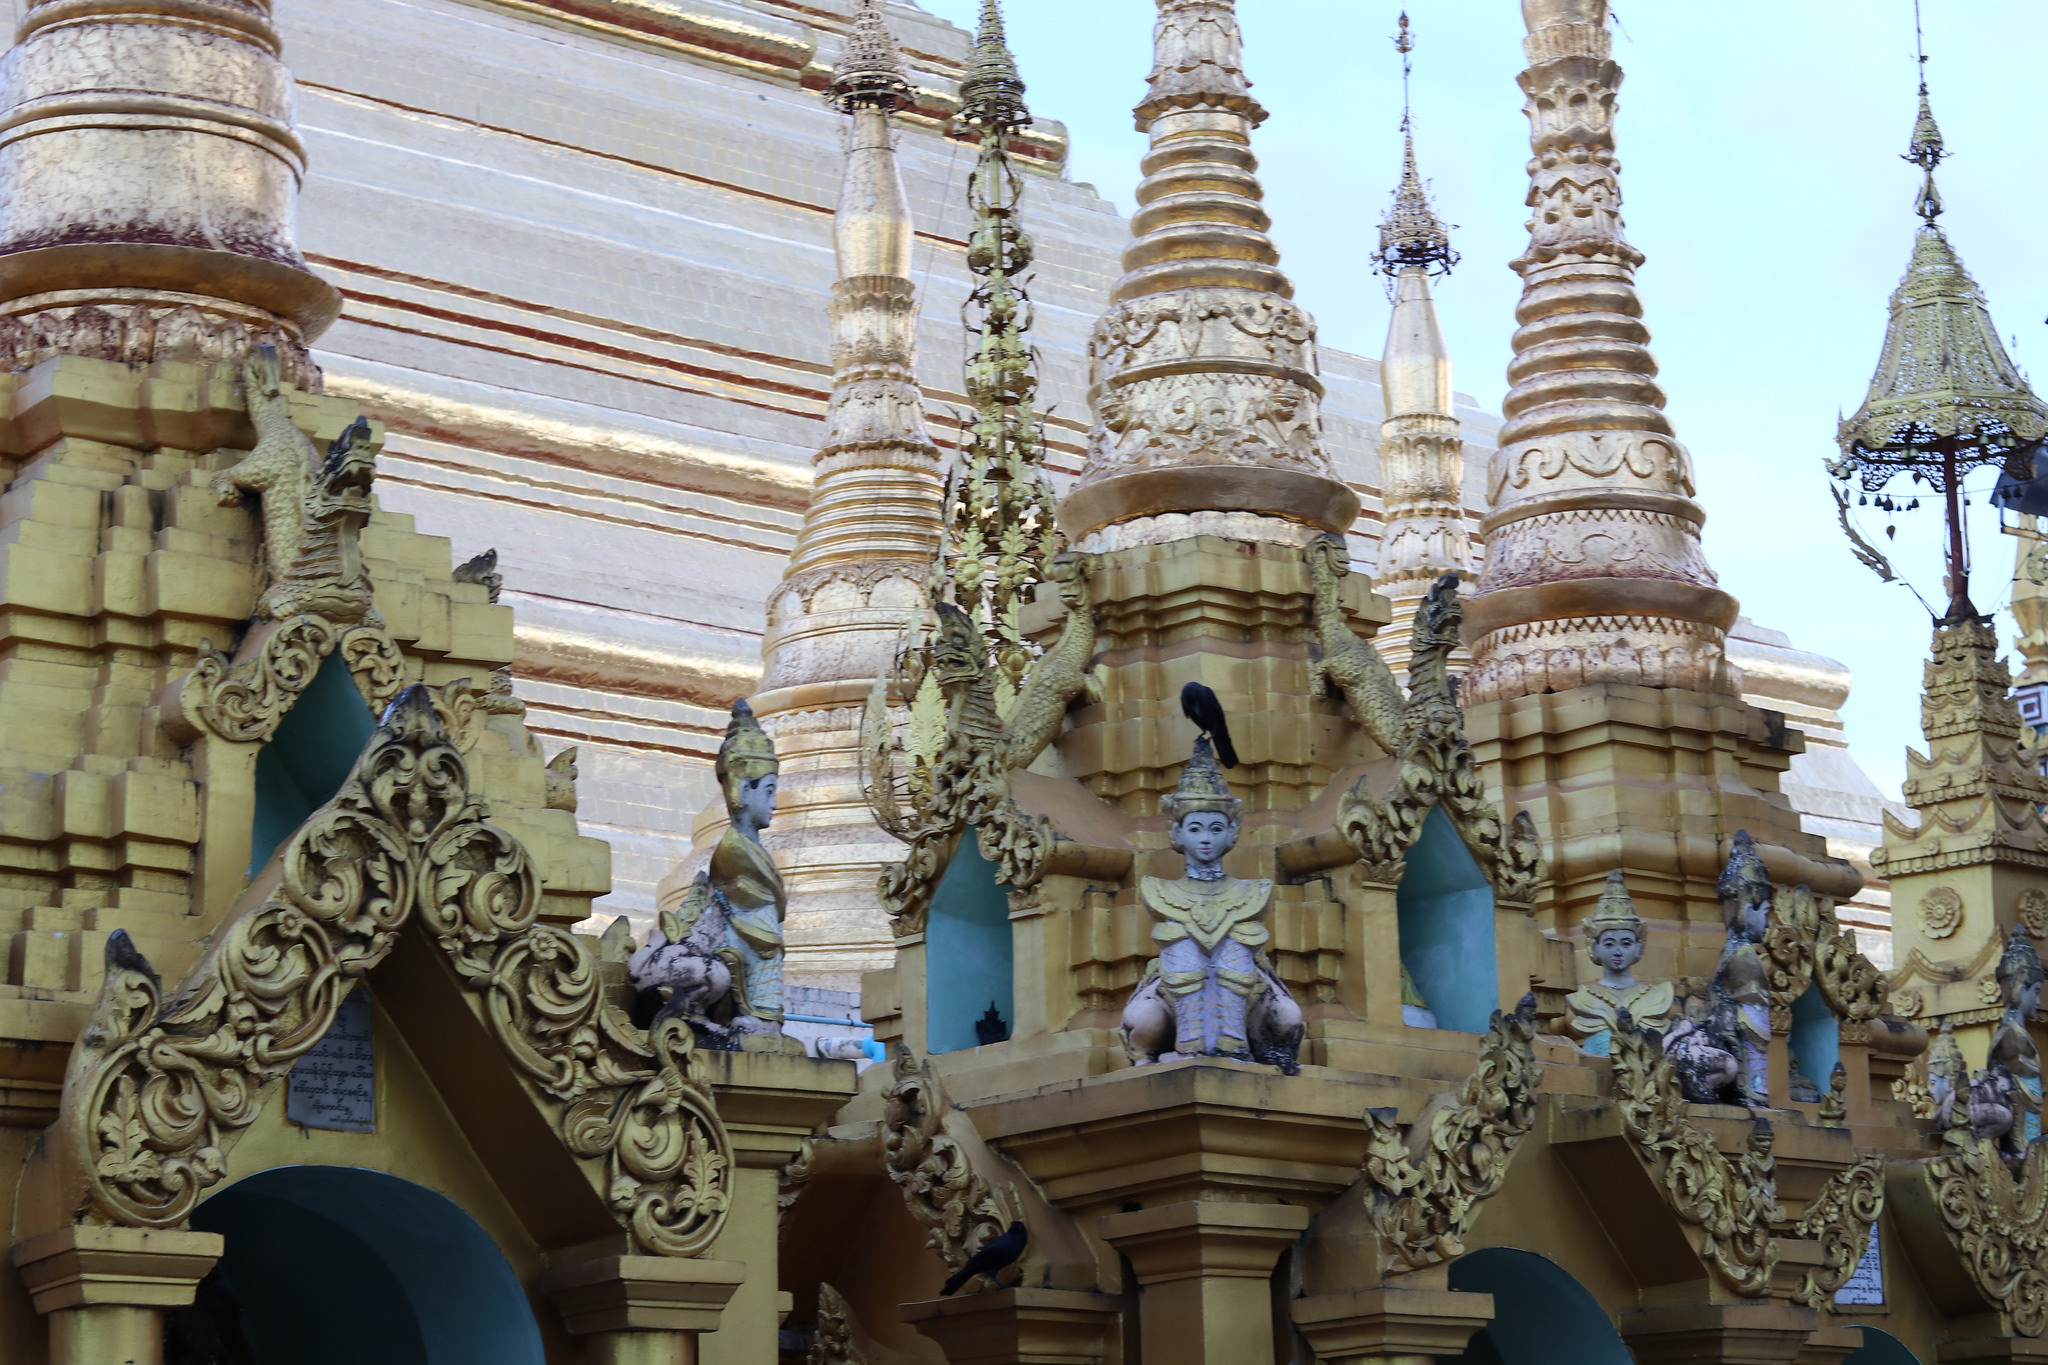 where is the shwedagon pagoda located and when was yangons incredible jeweled buddhist temple built